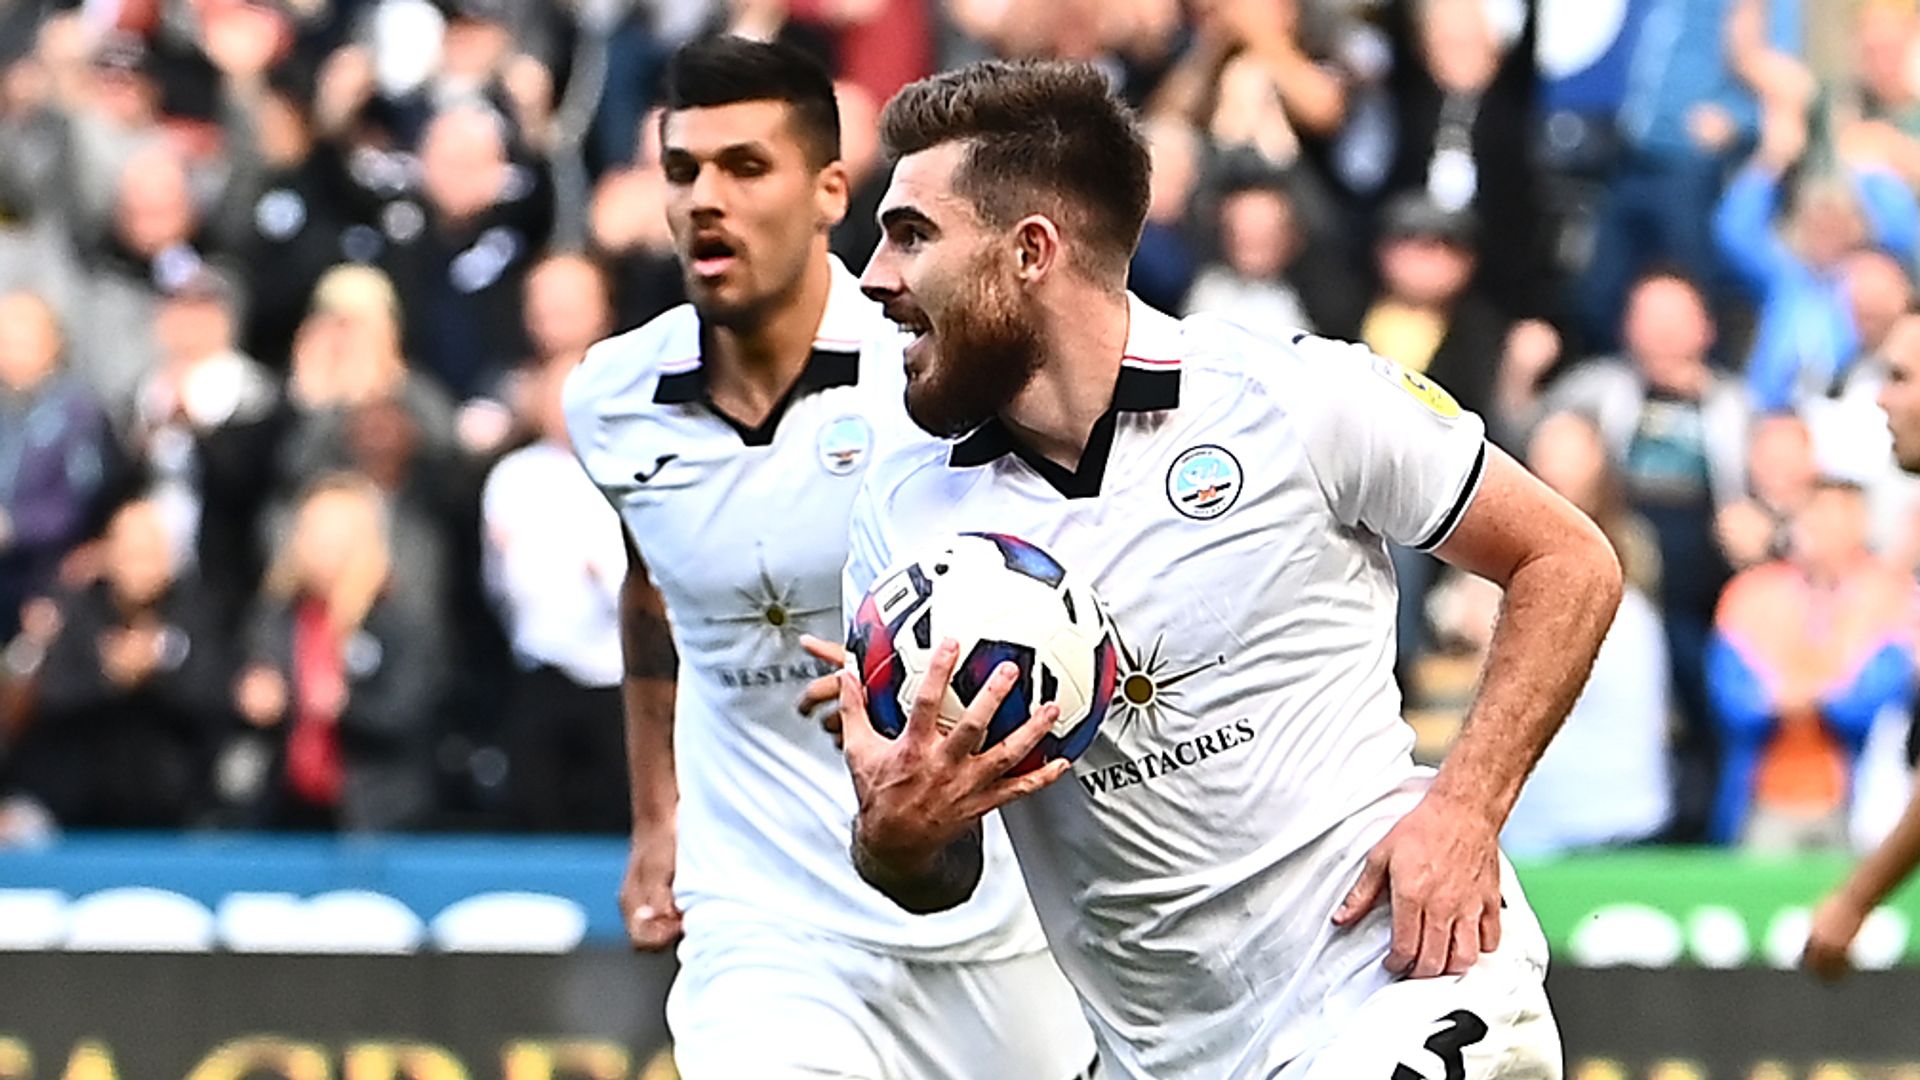 Swansea see off Hull after Figueiredo howlers